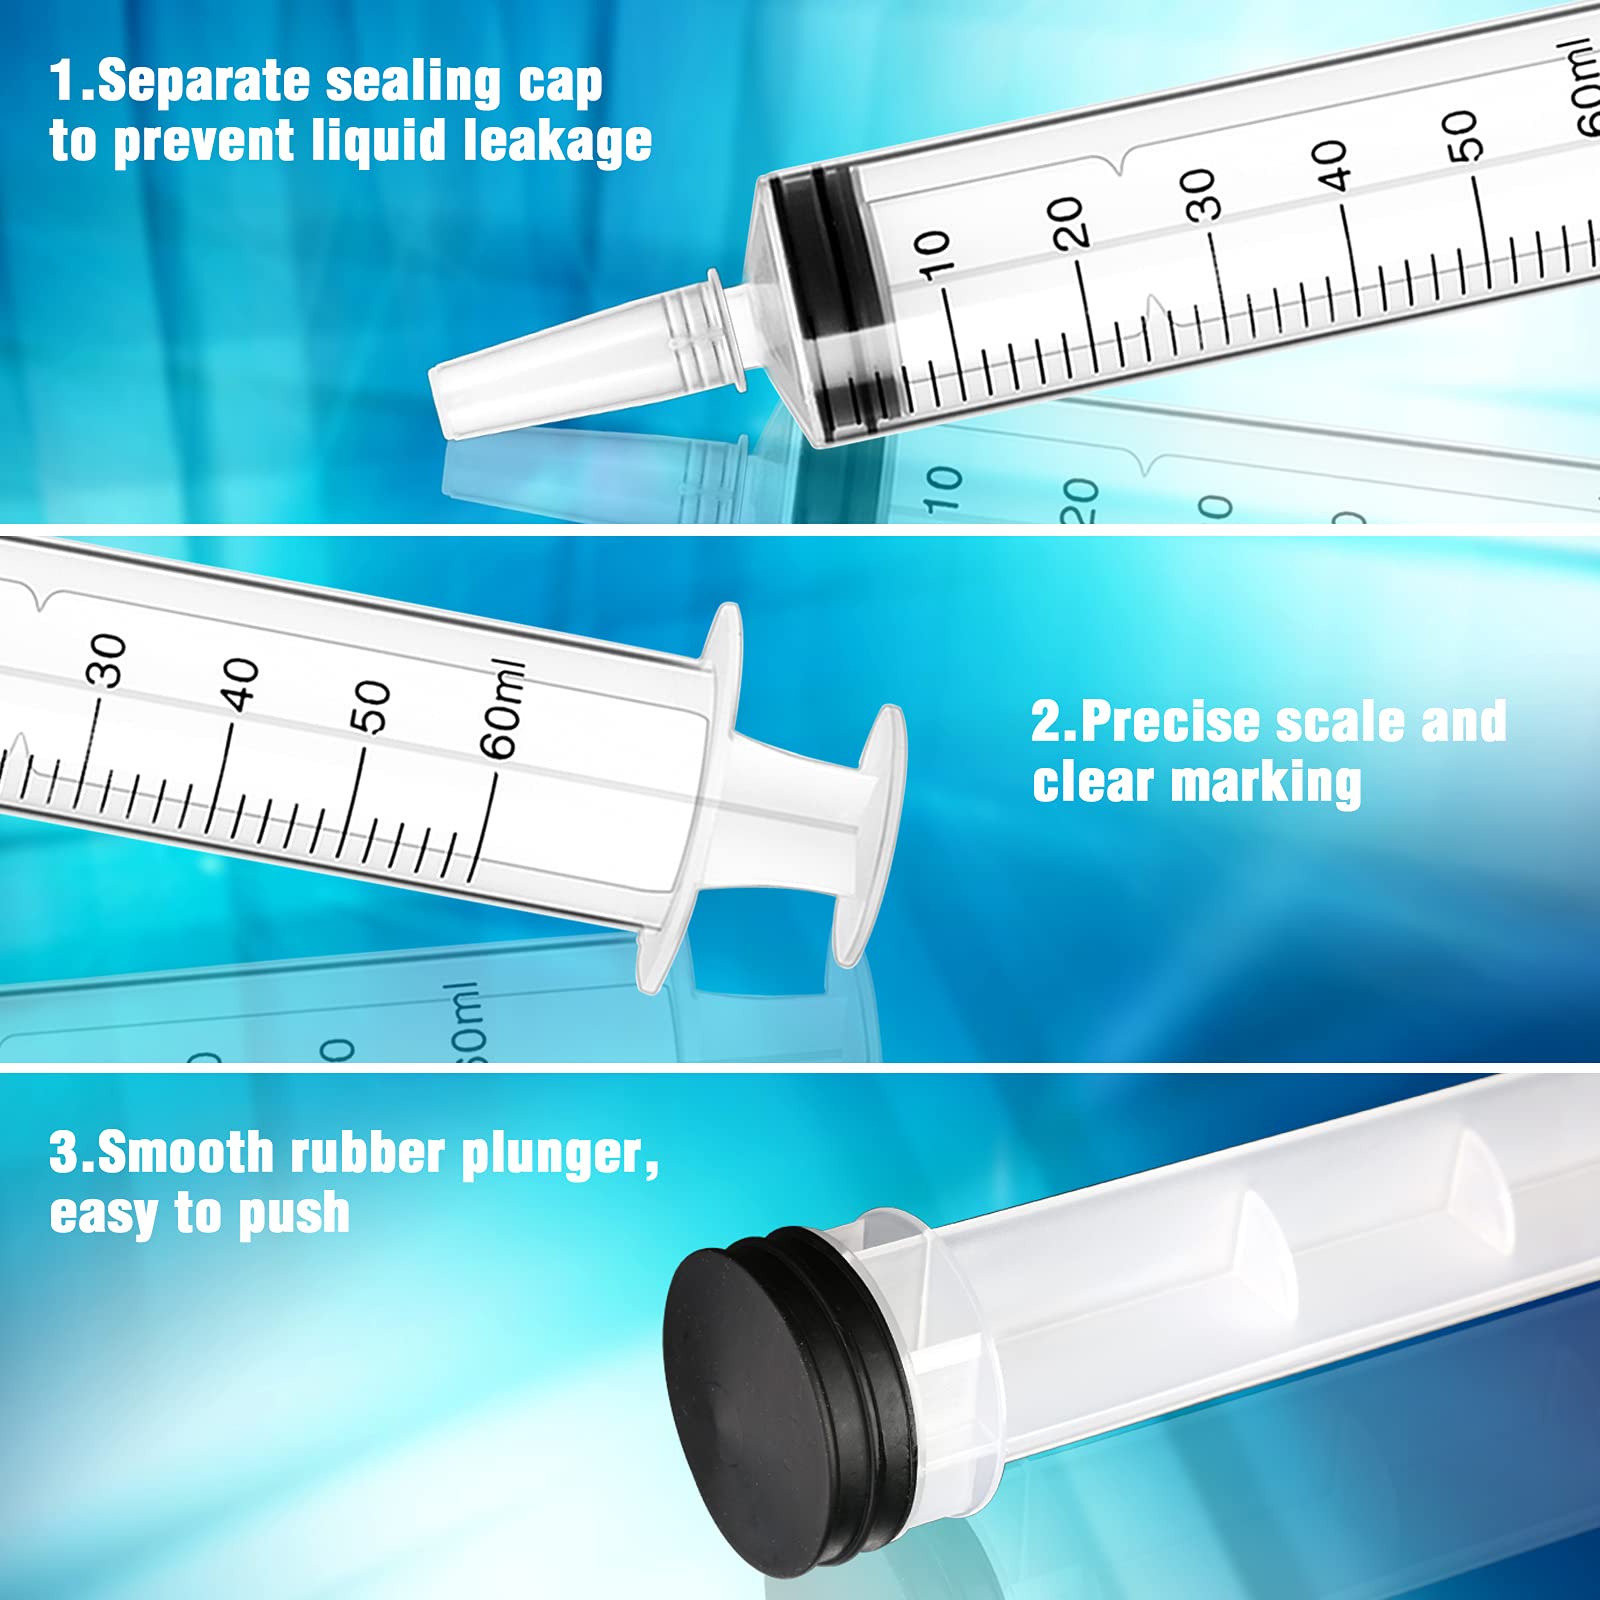 60ml Syringe 4 pack Plastic Syringe with Cap Feeding Syringe for Pets Individually Packaged Syringes Measuring Syringe Sterile for Labs, Food, Dispensing, Watering